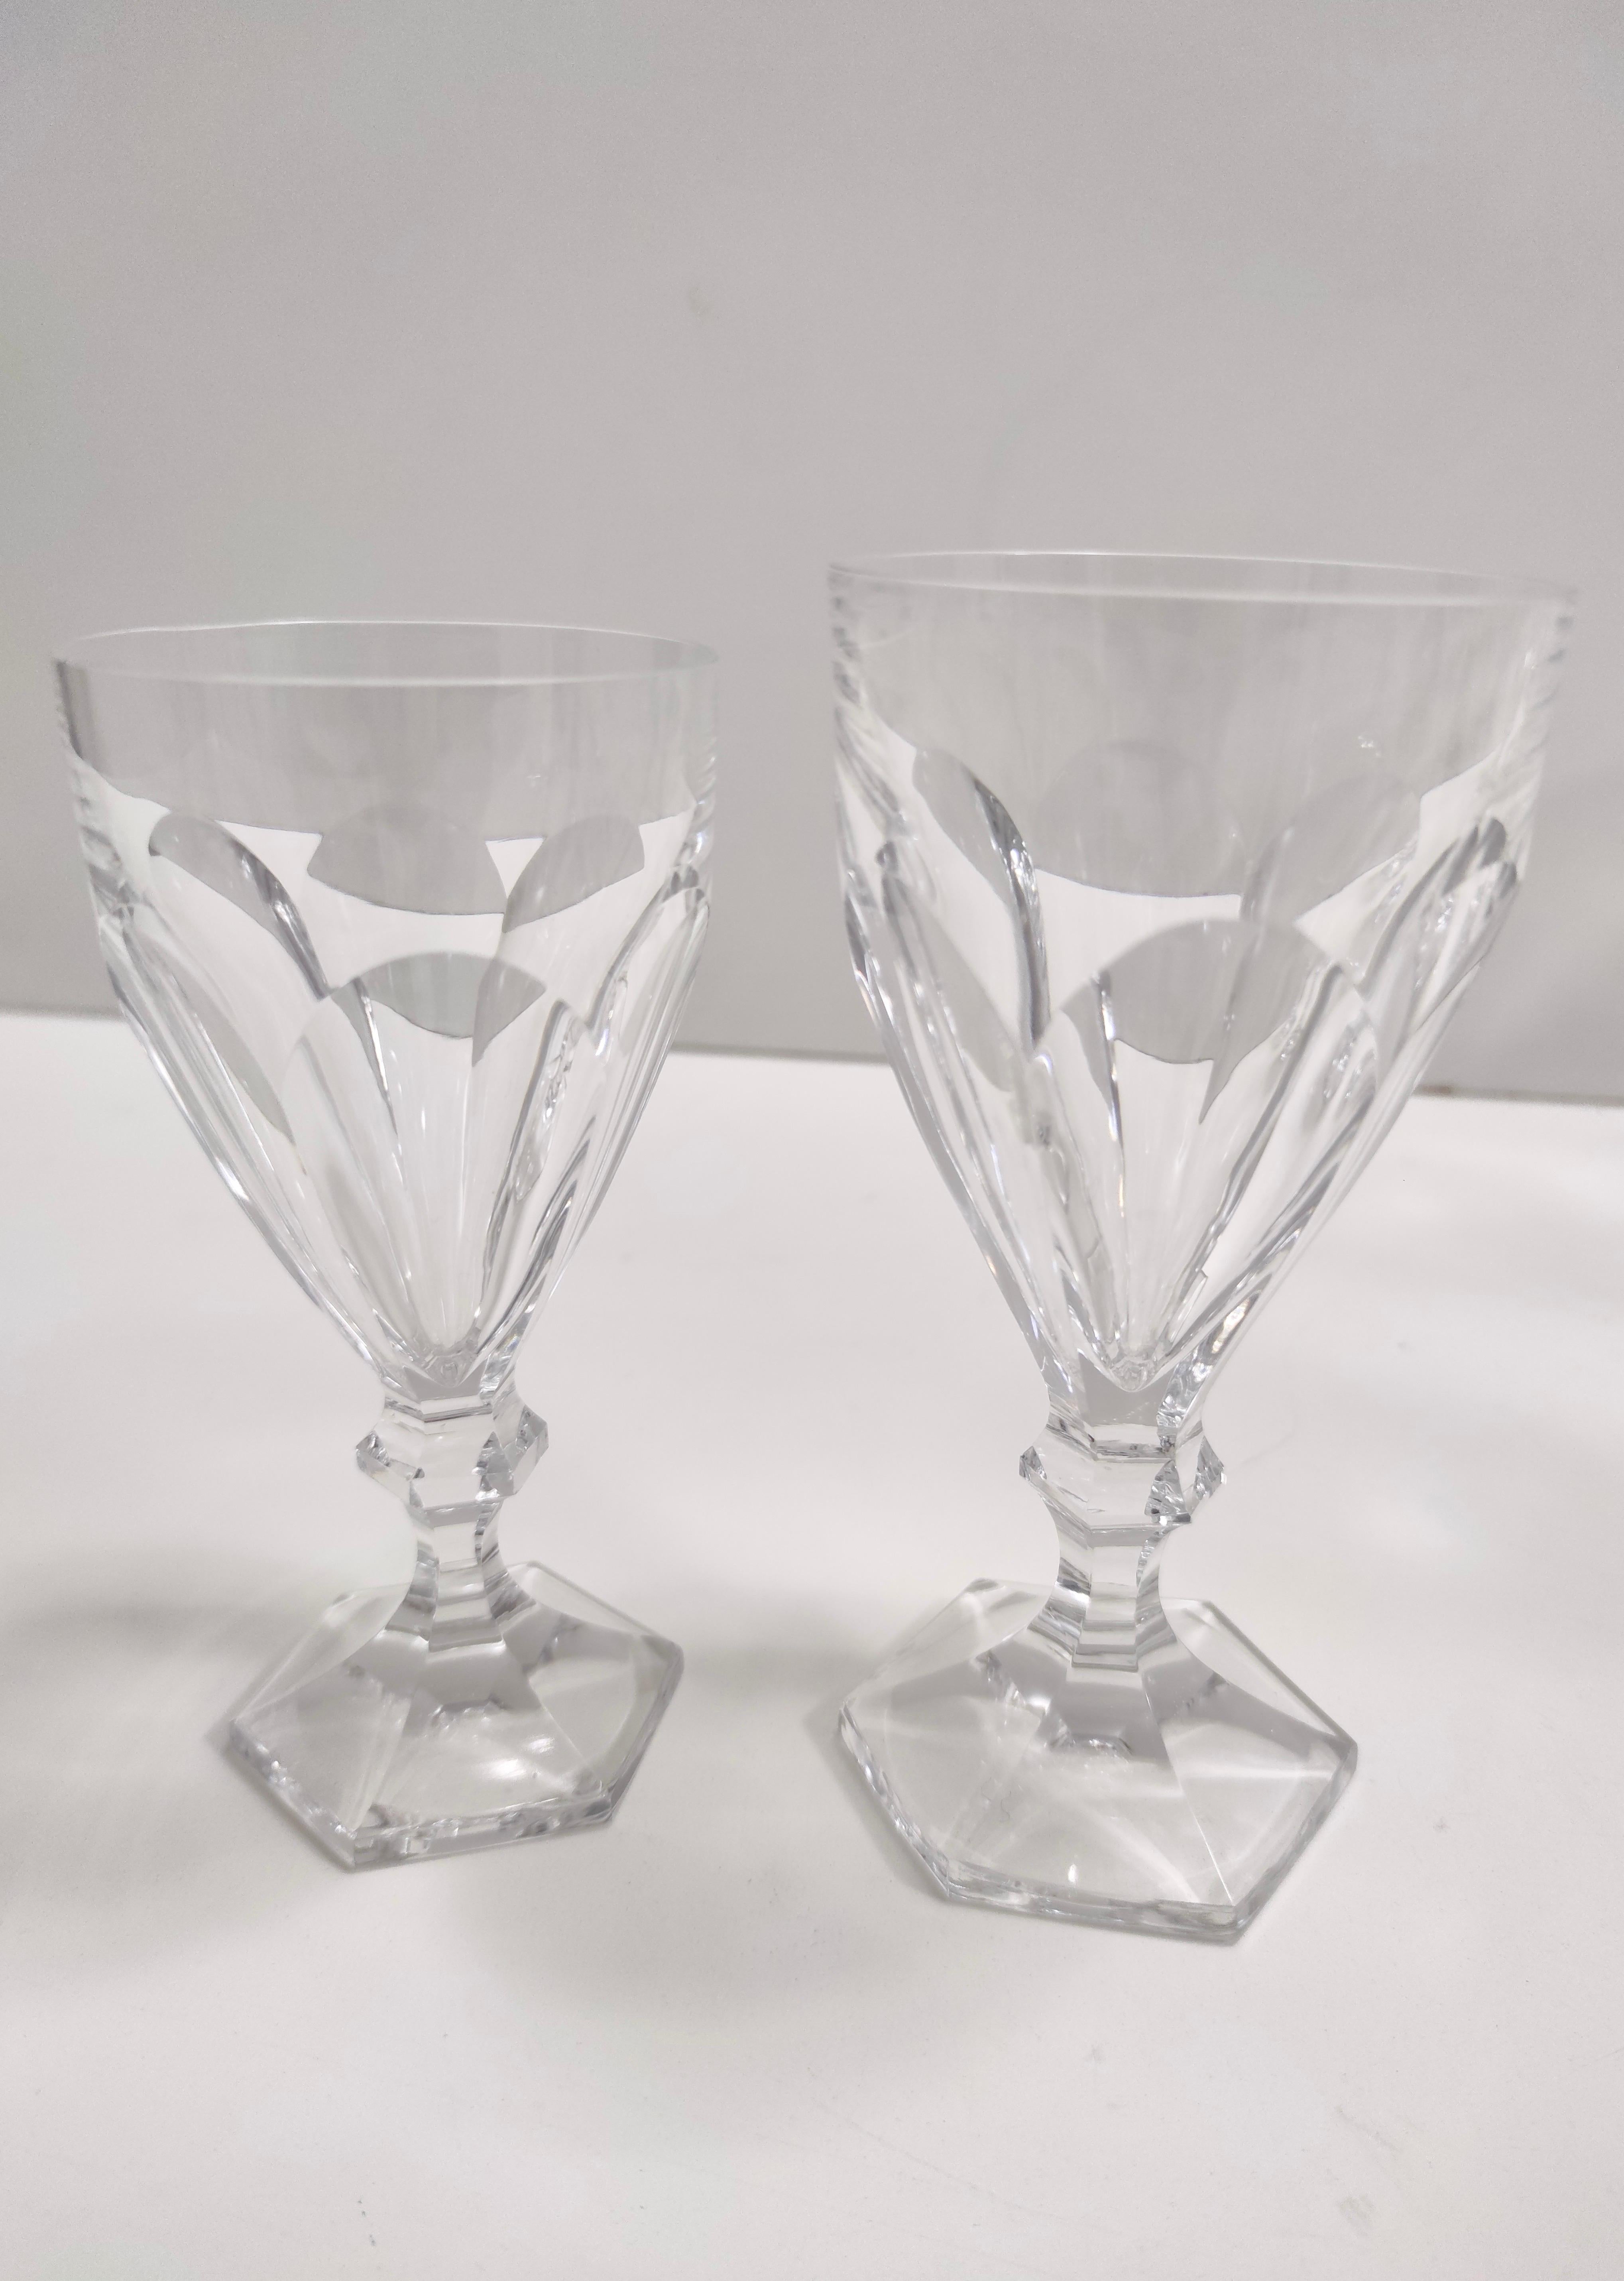 Postmodern Set of Eighteen Solid Crystal Drinking Glasses by Kosta Boda, Sweden For Sale 3